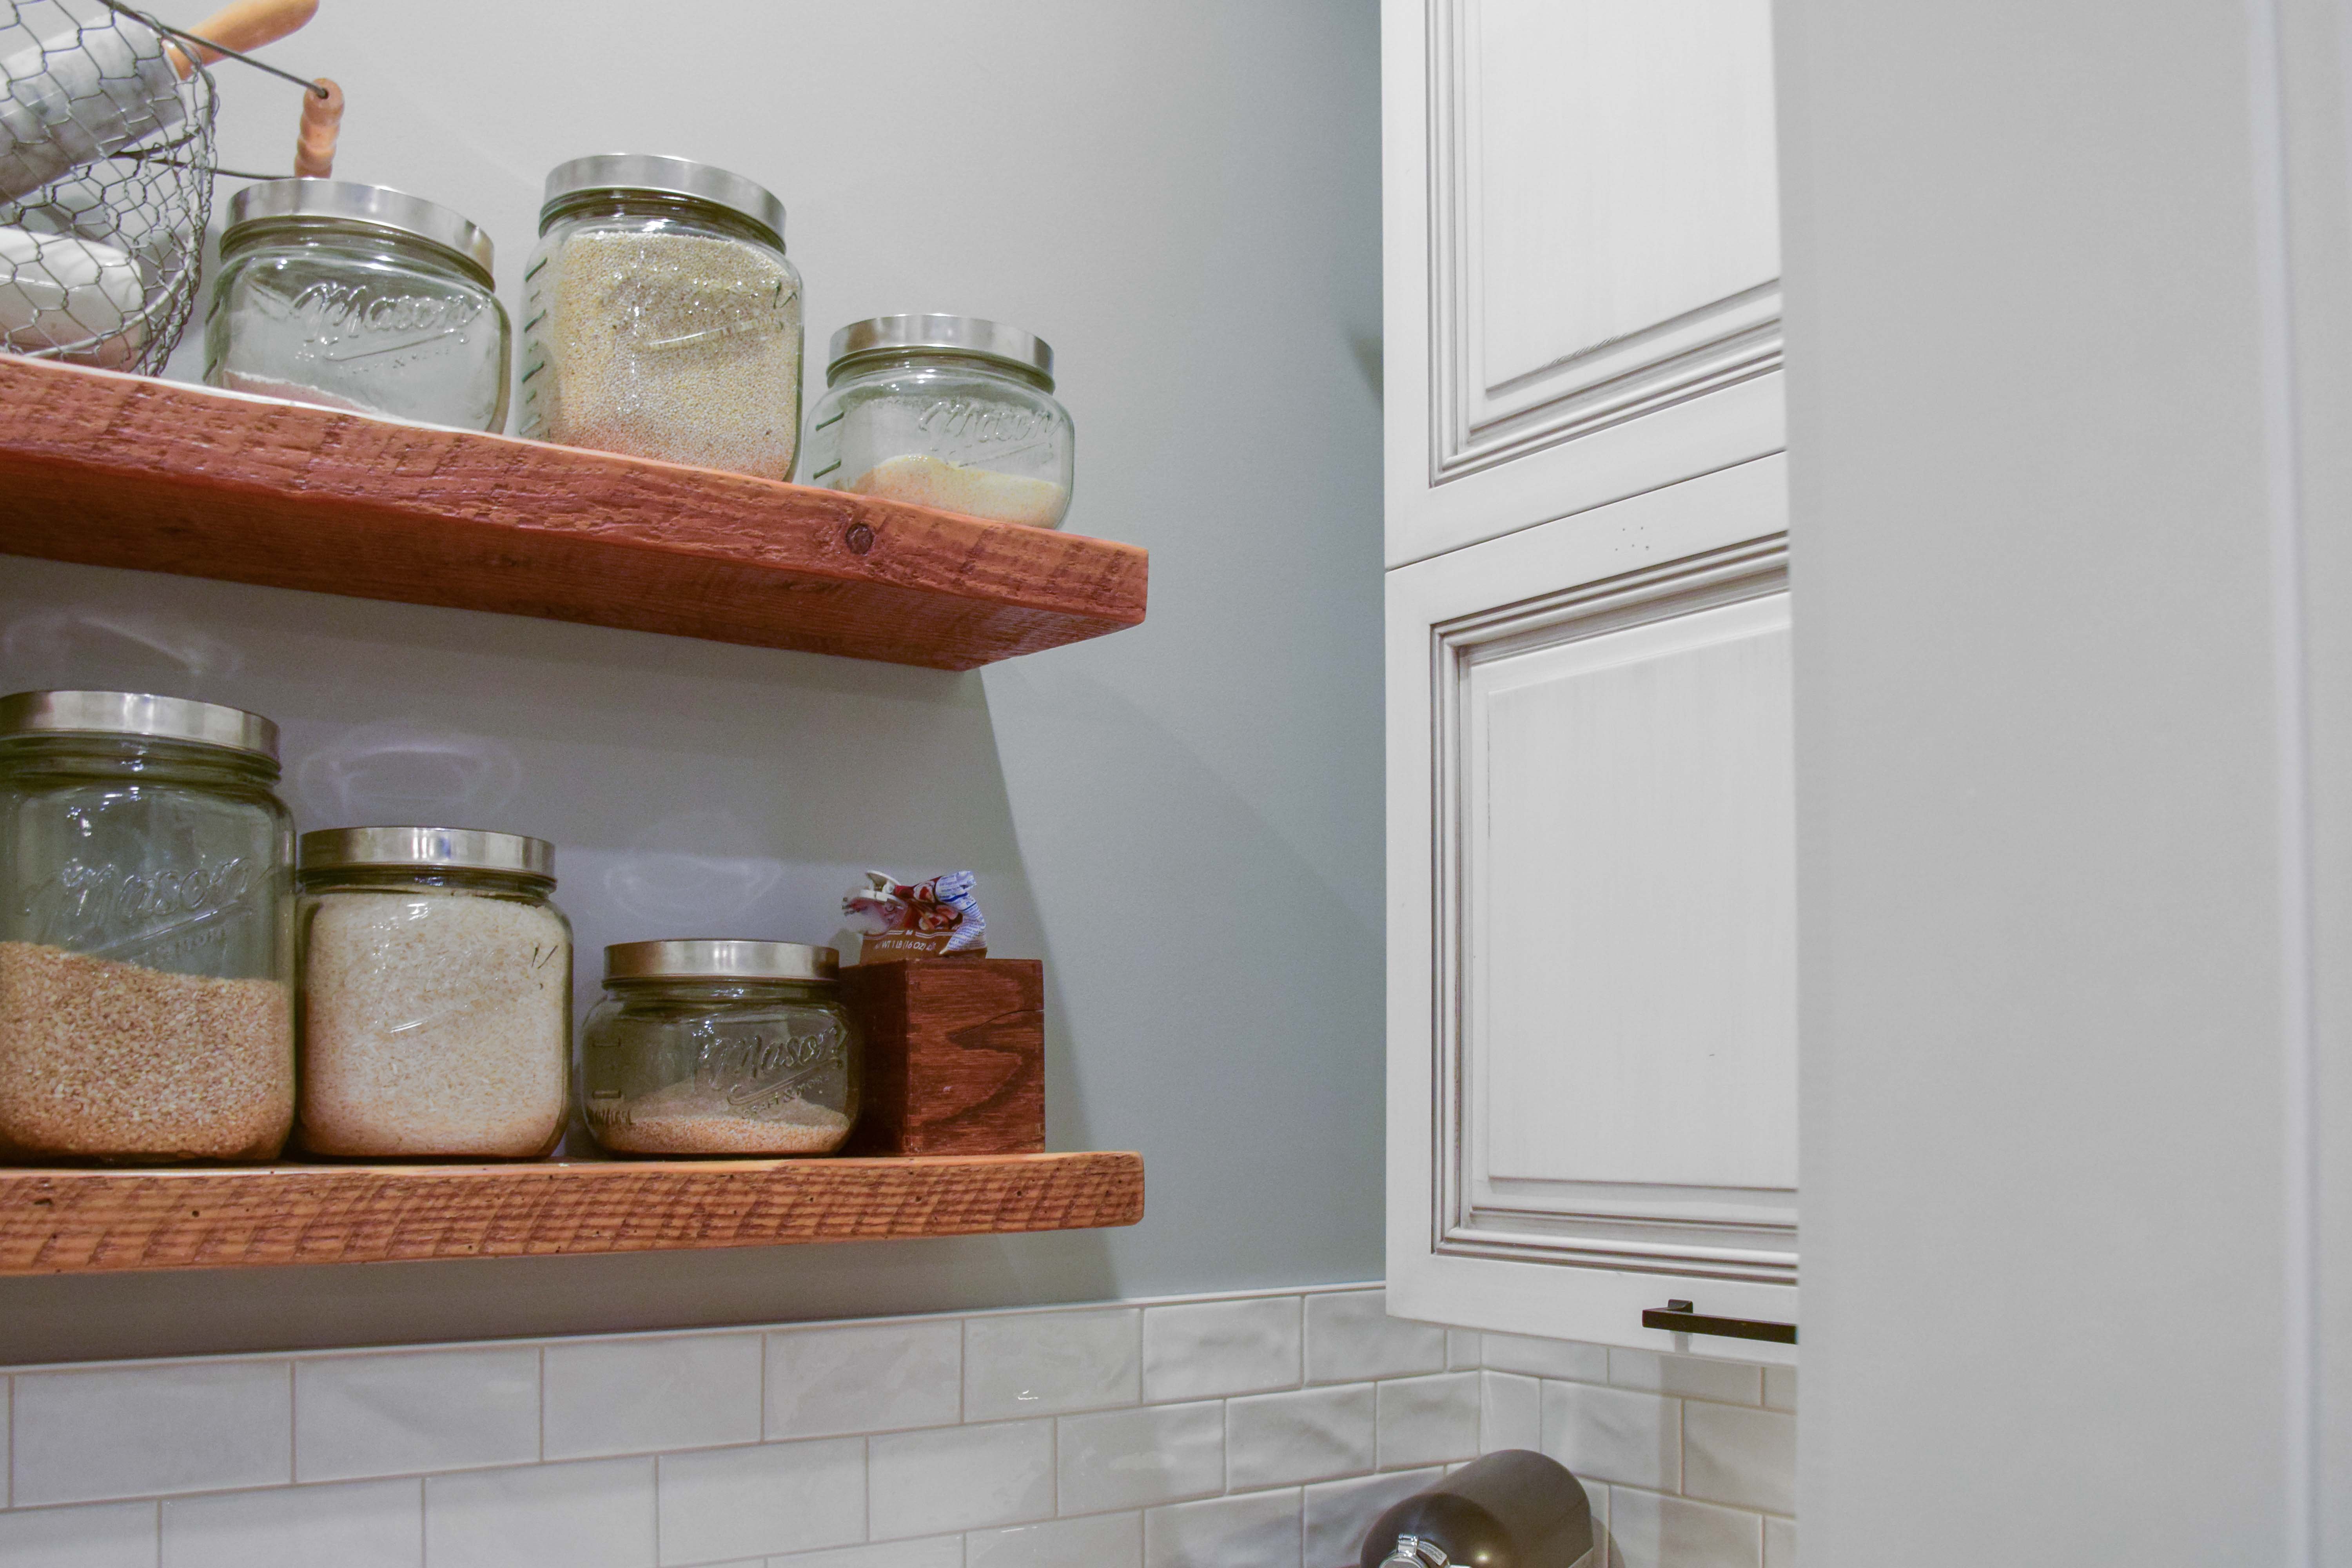 Walk-in pantry with wood shelves and glass jars. 